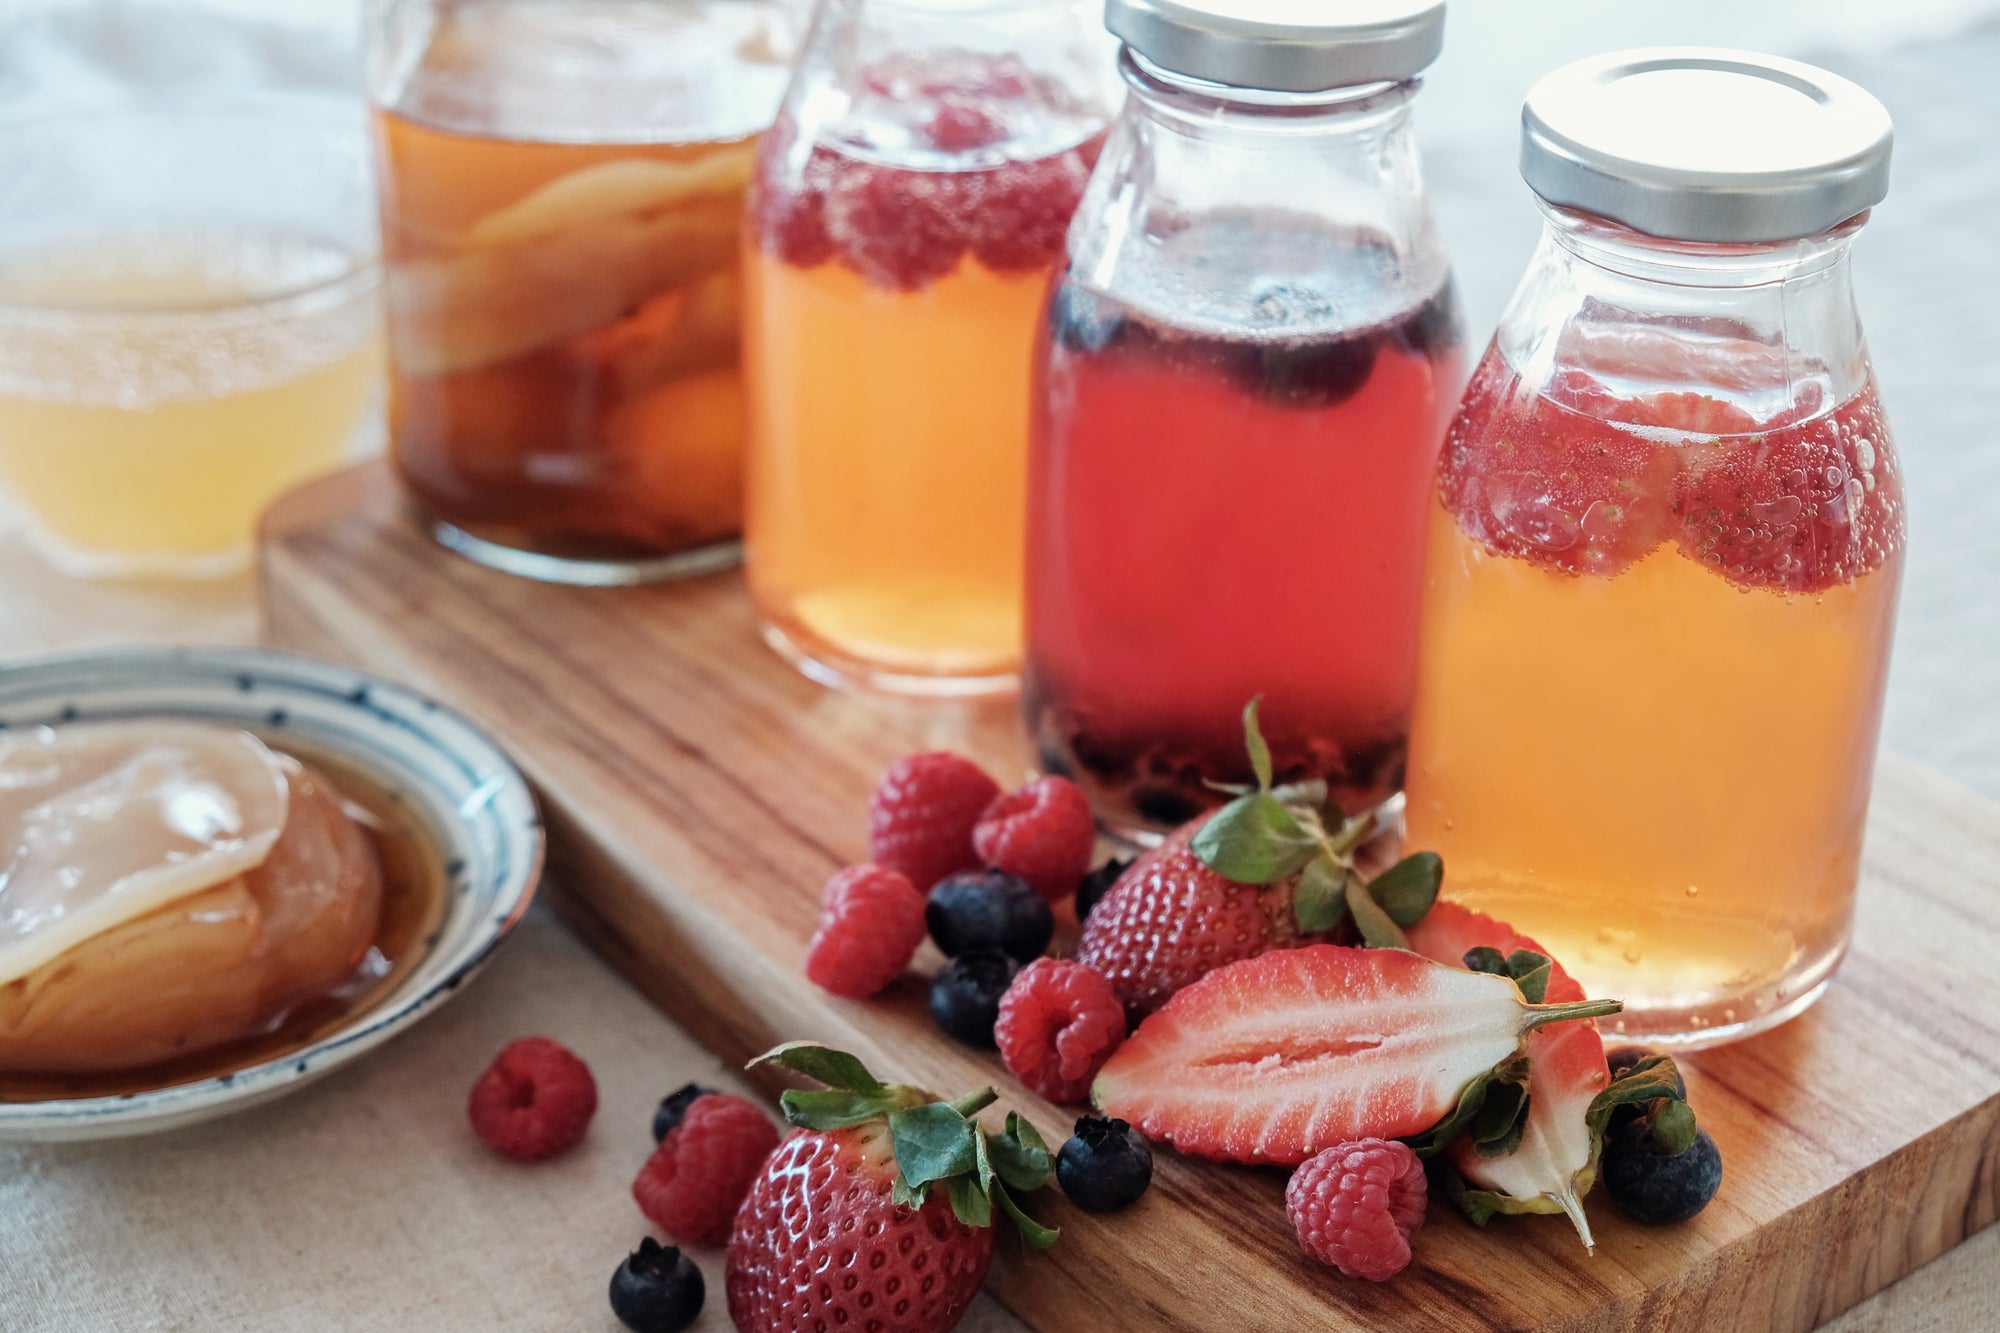 Brewing Your Own Kombucha Is Easier—And Cheaper—Than You May Think